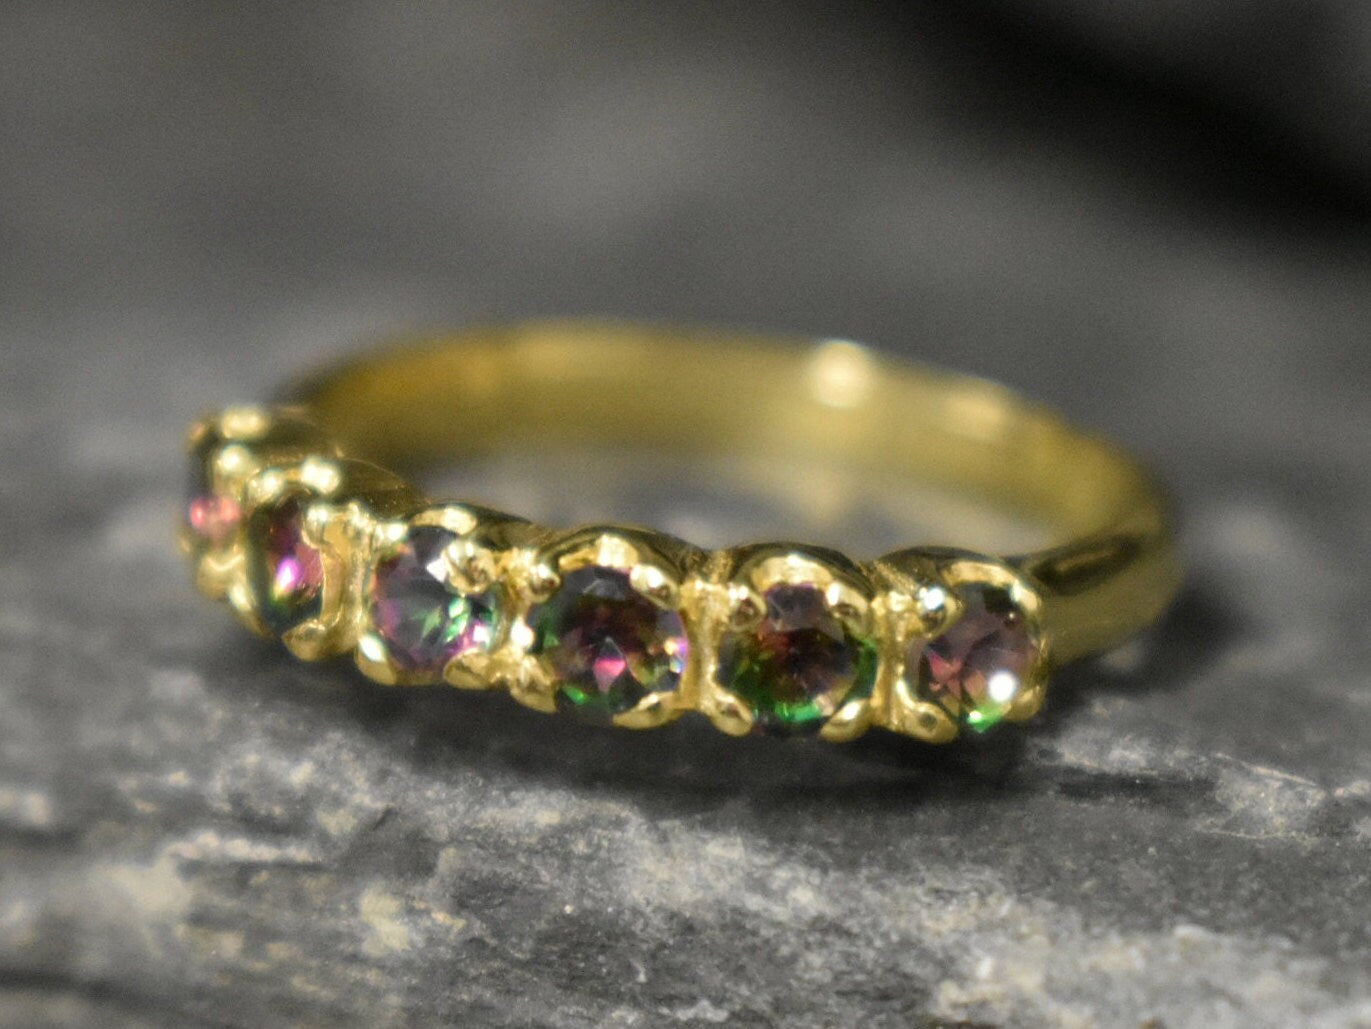 Gold Topaz Band, Mystic Topaz Ring, Natural Mystic Topaz, December Ring, Stackable Ring, Purple VintageRing, Topaz Ring, Purple Topaz Ring